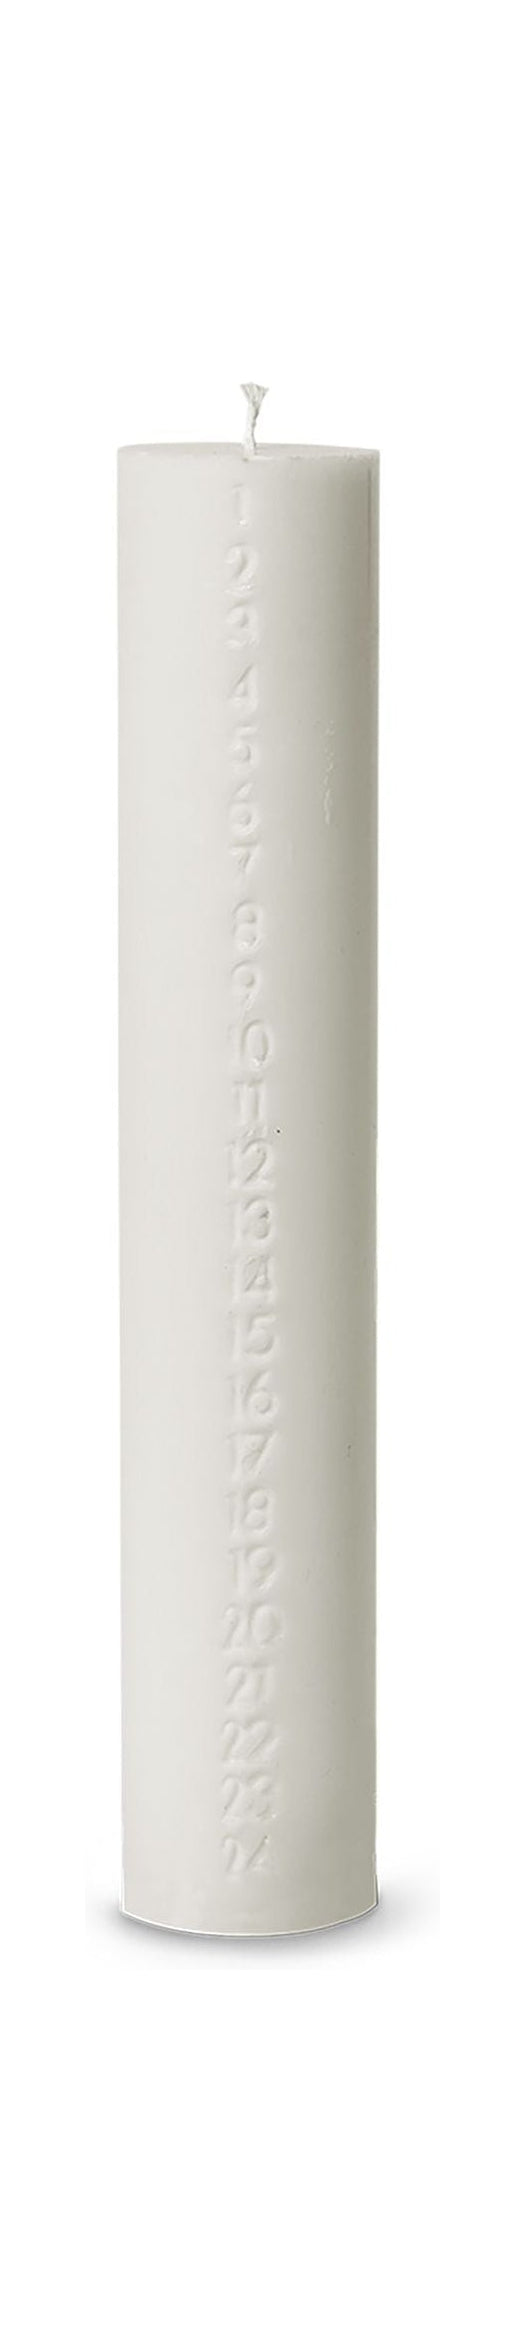 Ferm Living Pure Advent Candle, Sneeuwwitje